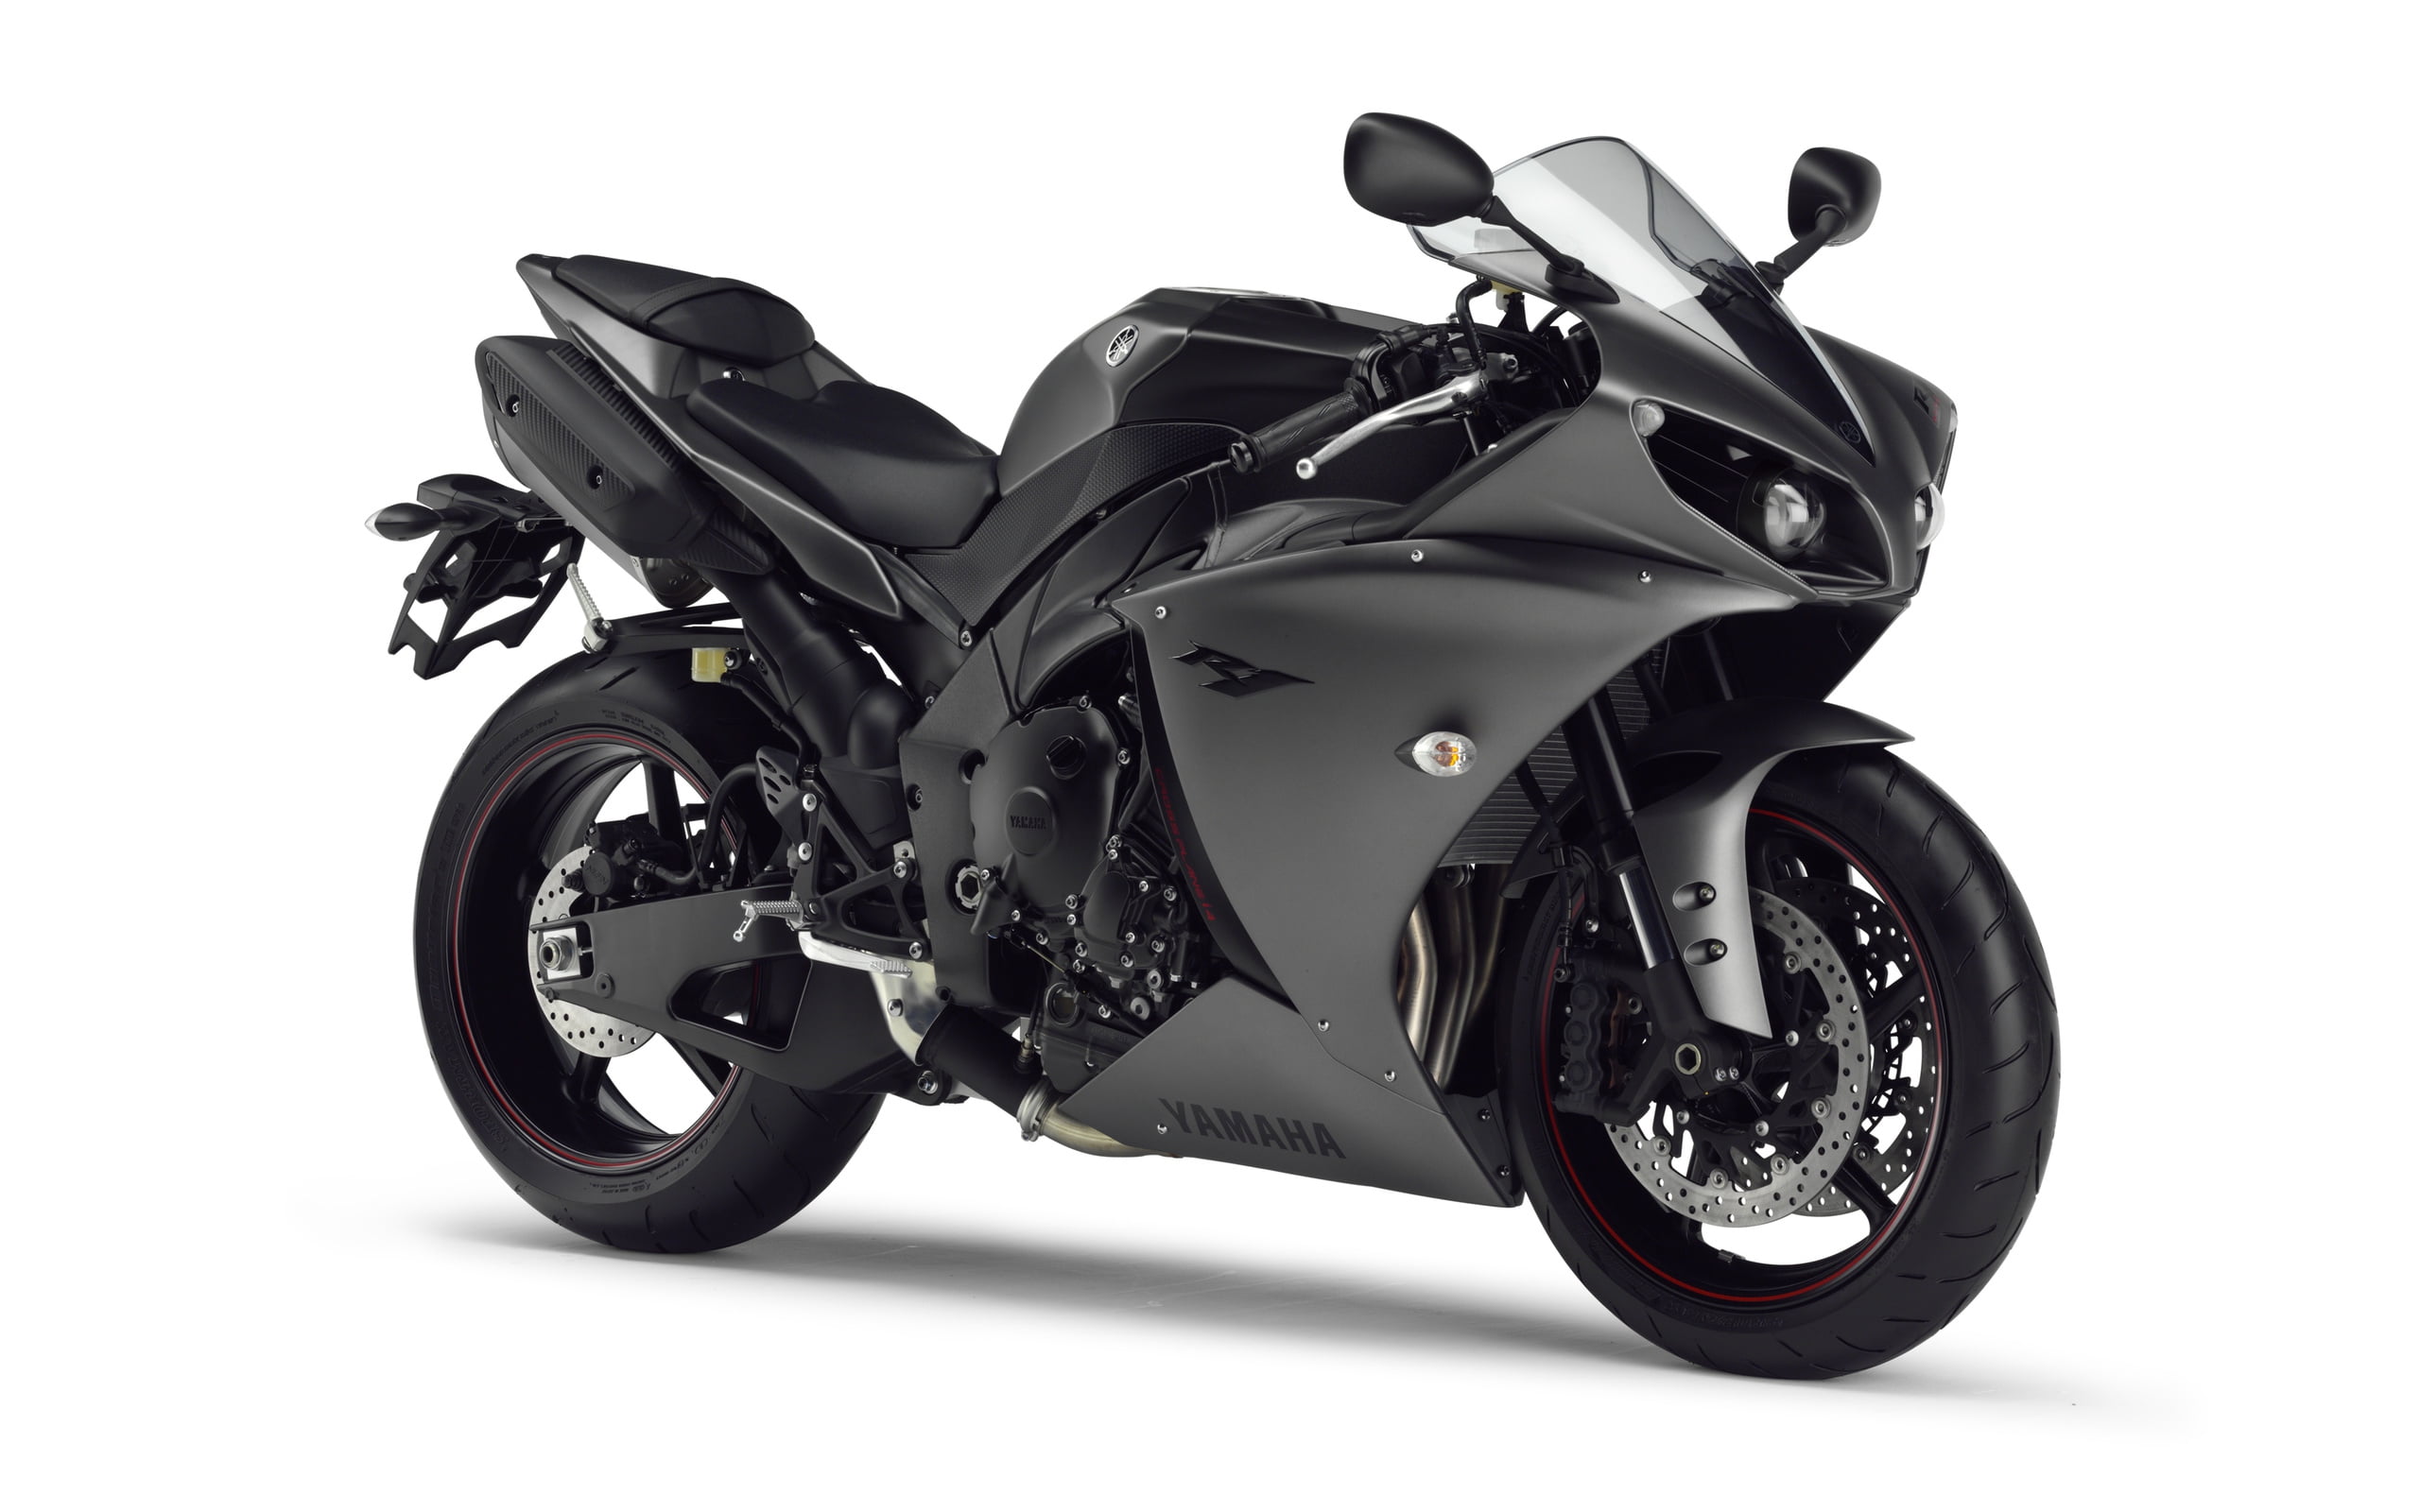 Yamaha Yzf R125 Price In India , HD Wallpaper & Backgrounds